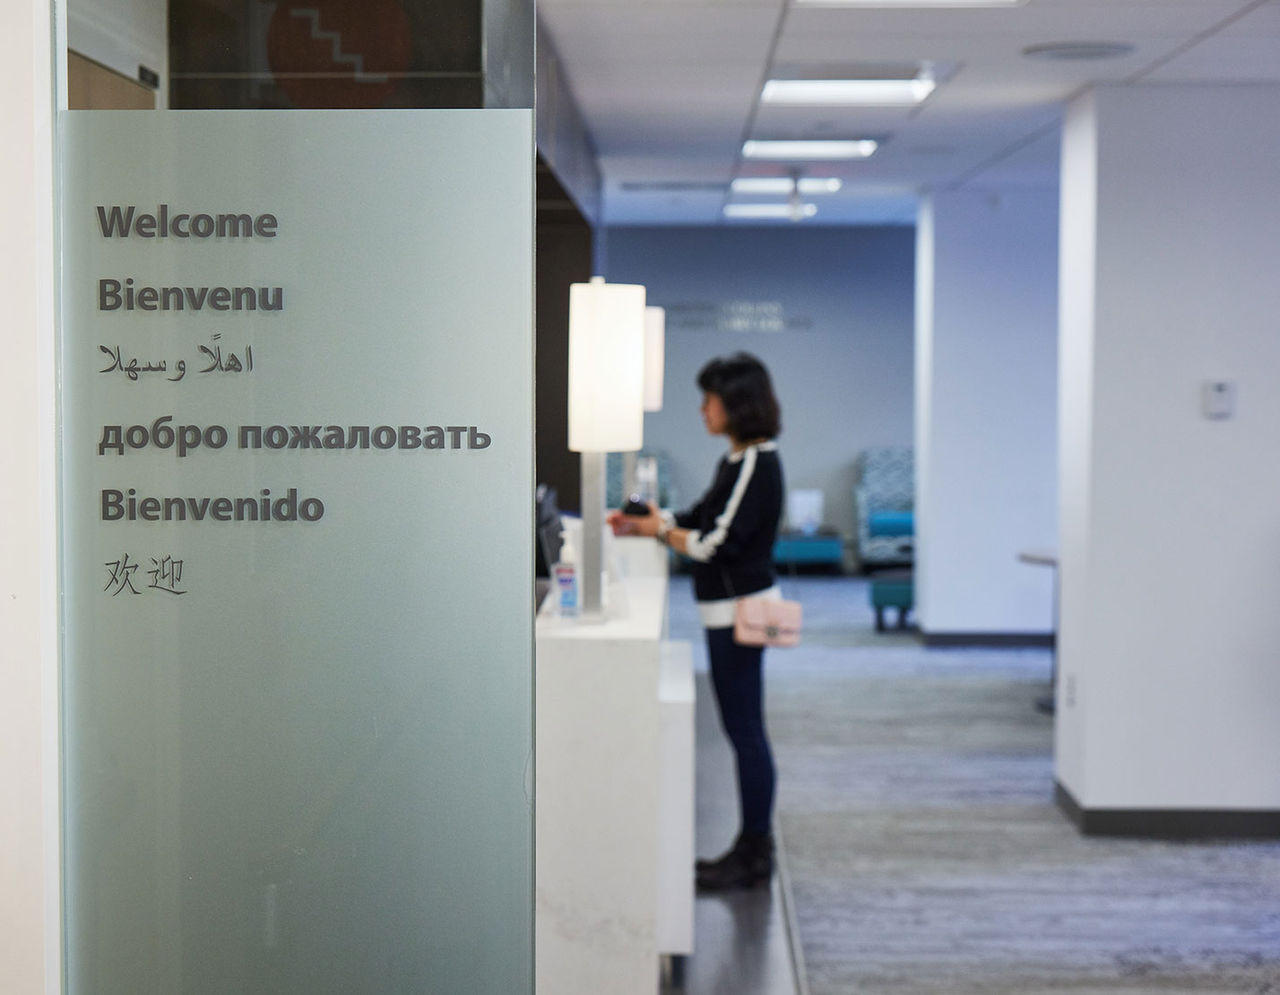 A welcome sign in many languages, with the office visible through the glass wall.